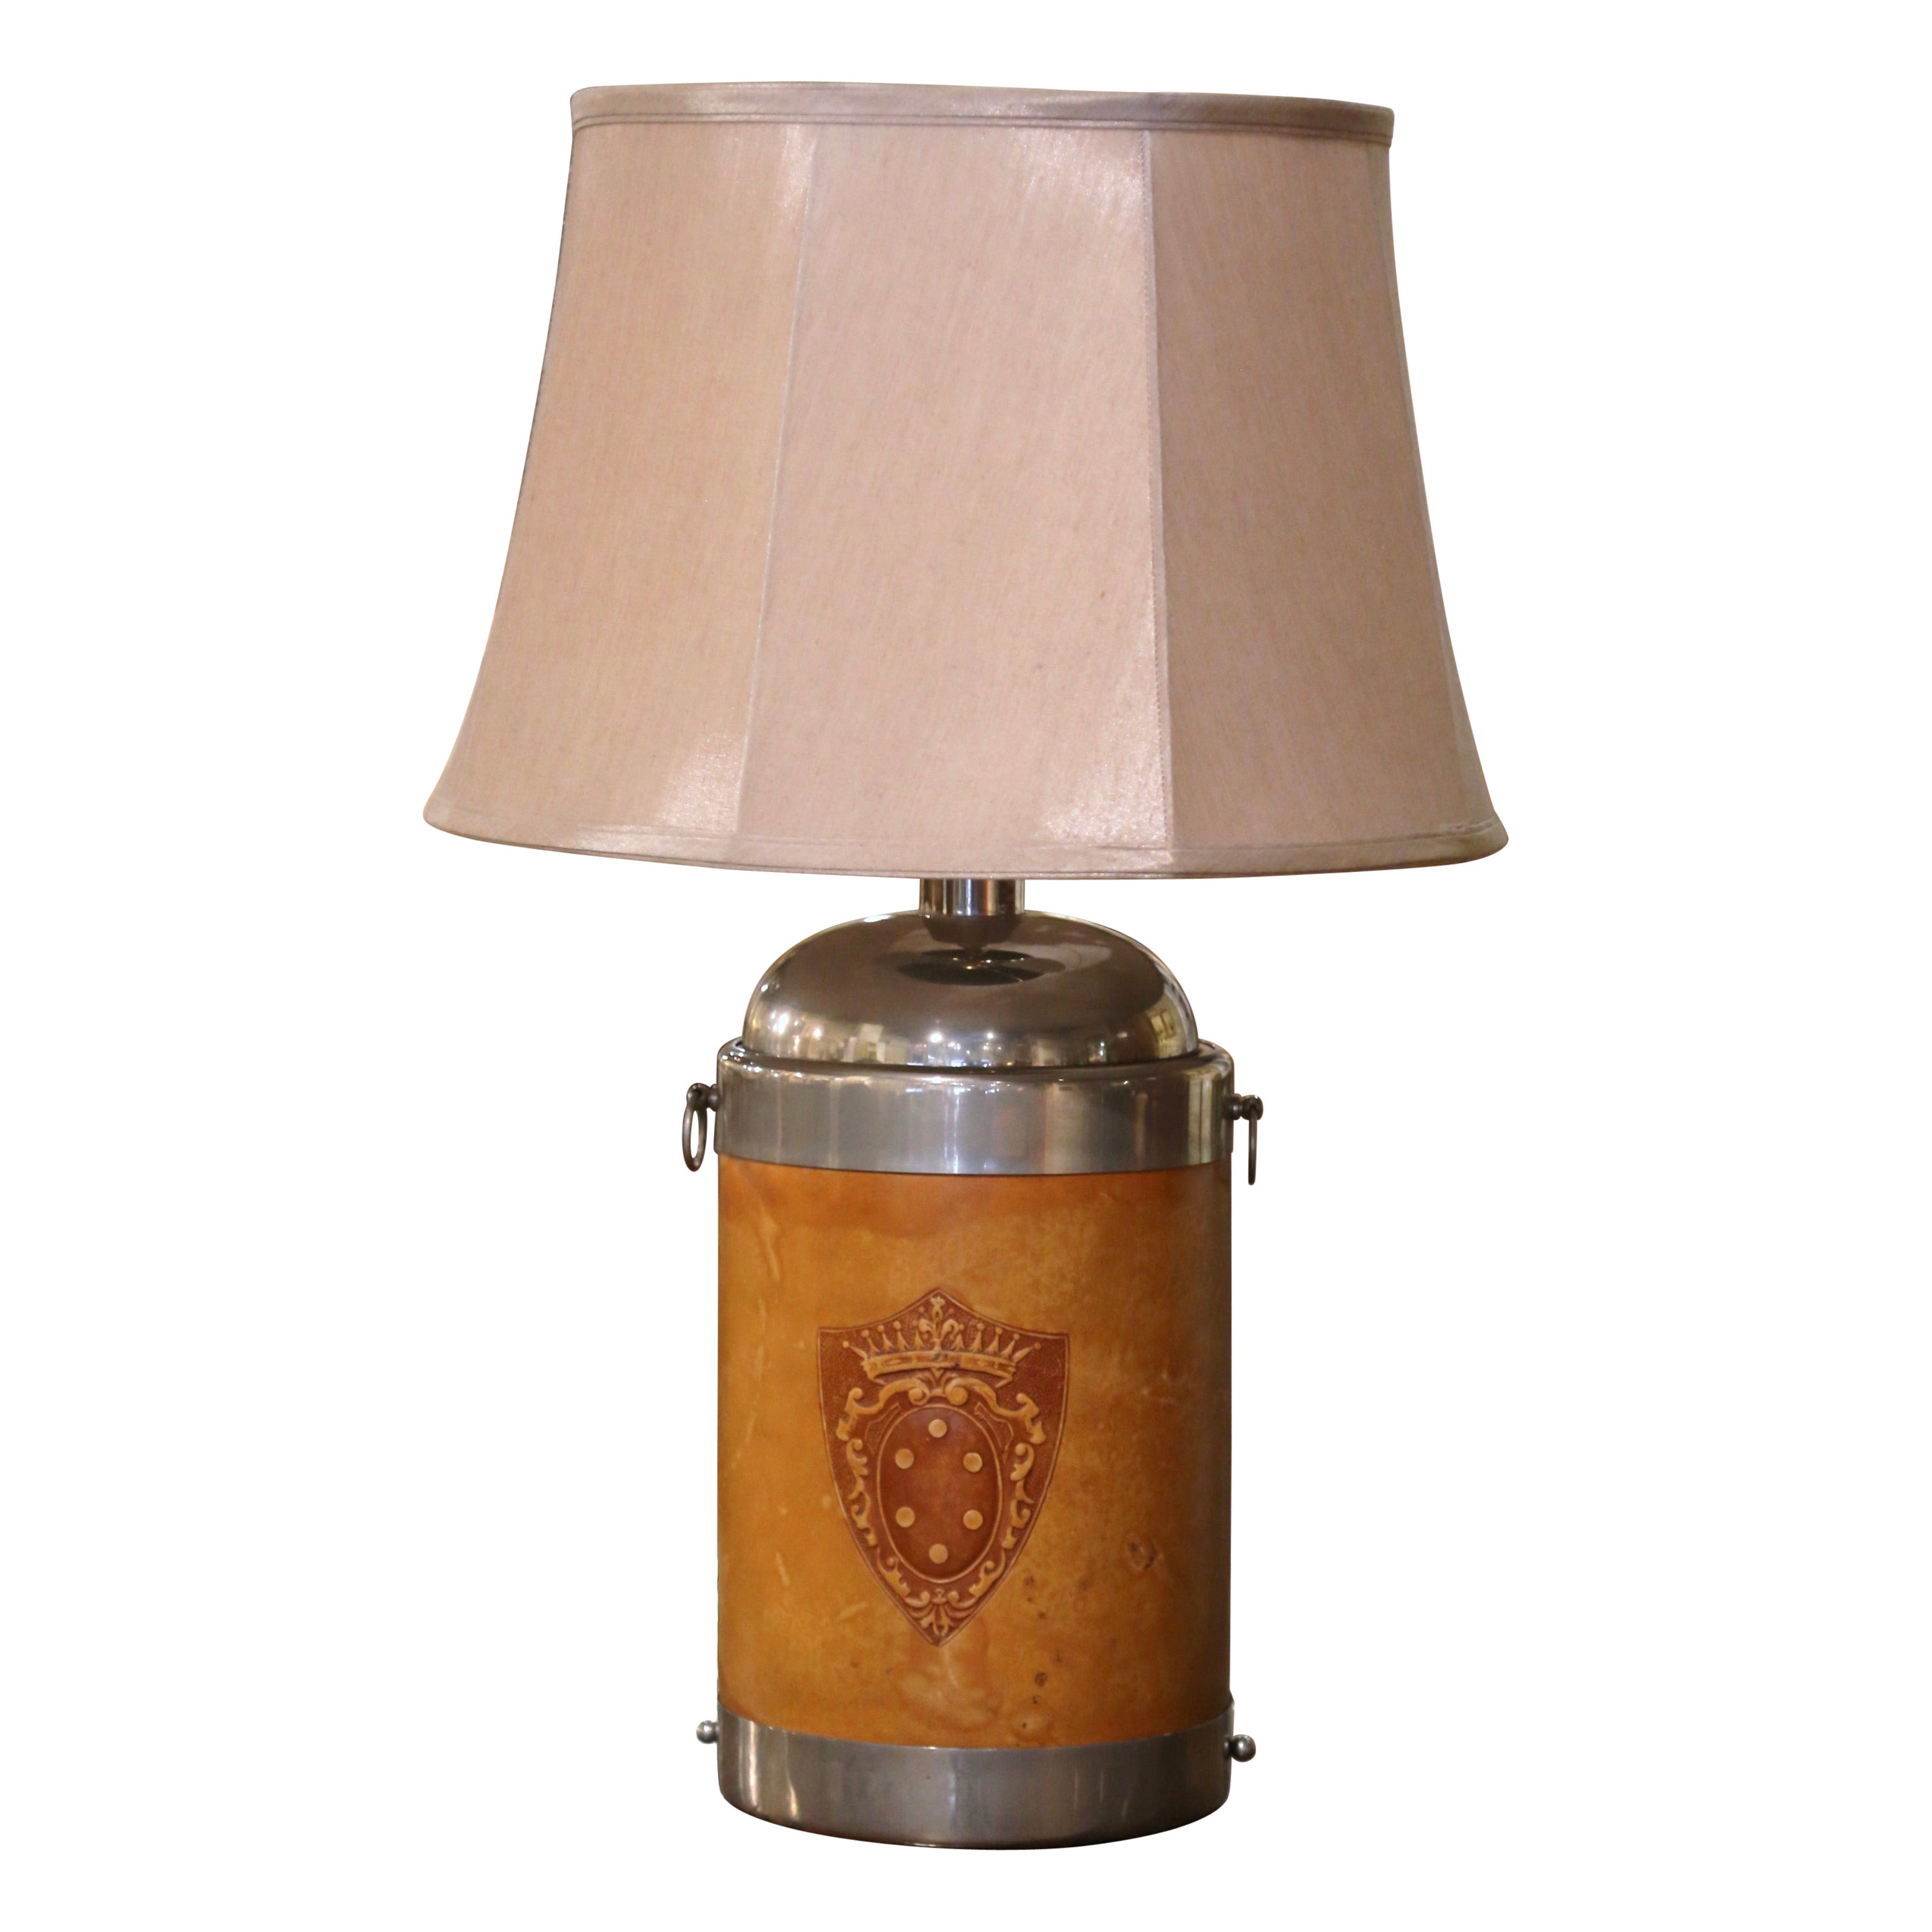 Early 20th Century French Chrome and Leather Table Lamp with Embossed Crest For Sale